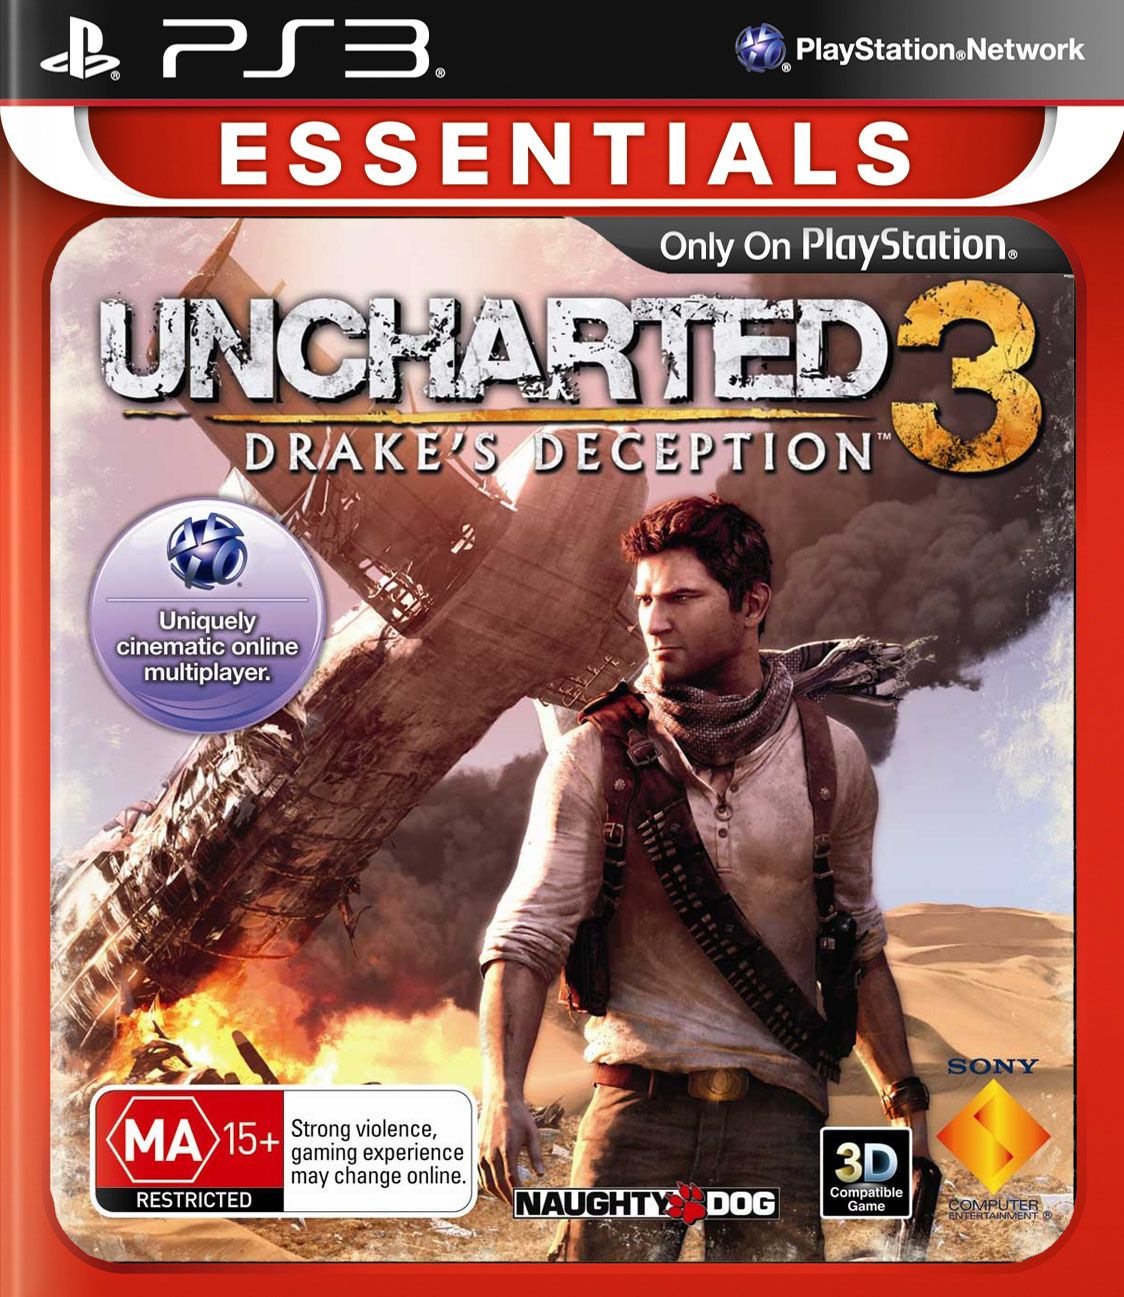 Game | Sony Playstation PS3 | Uncharted 3: Drake's Deception Essentials